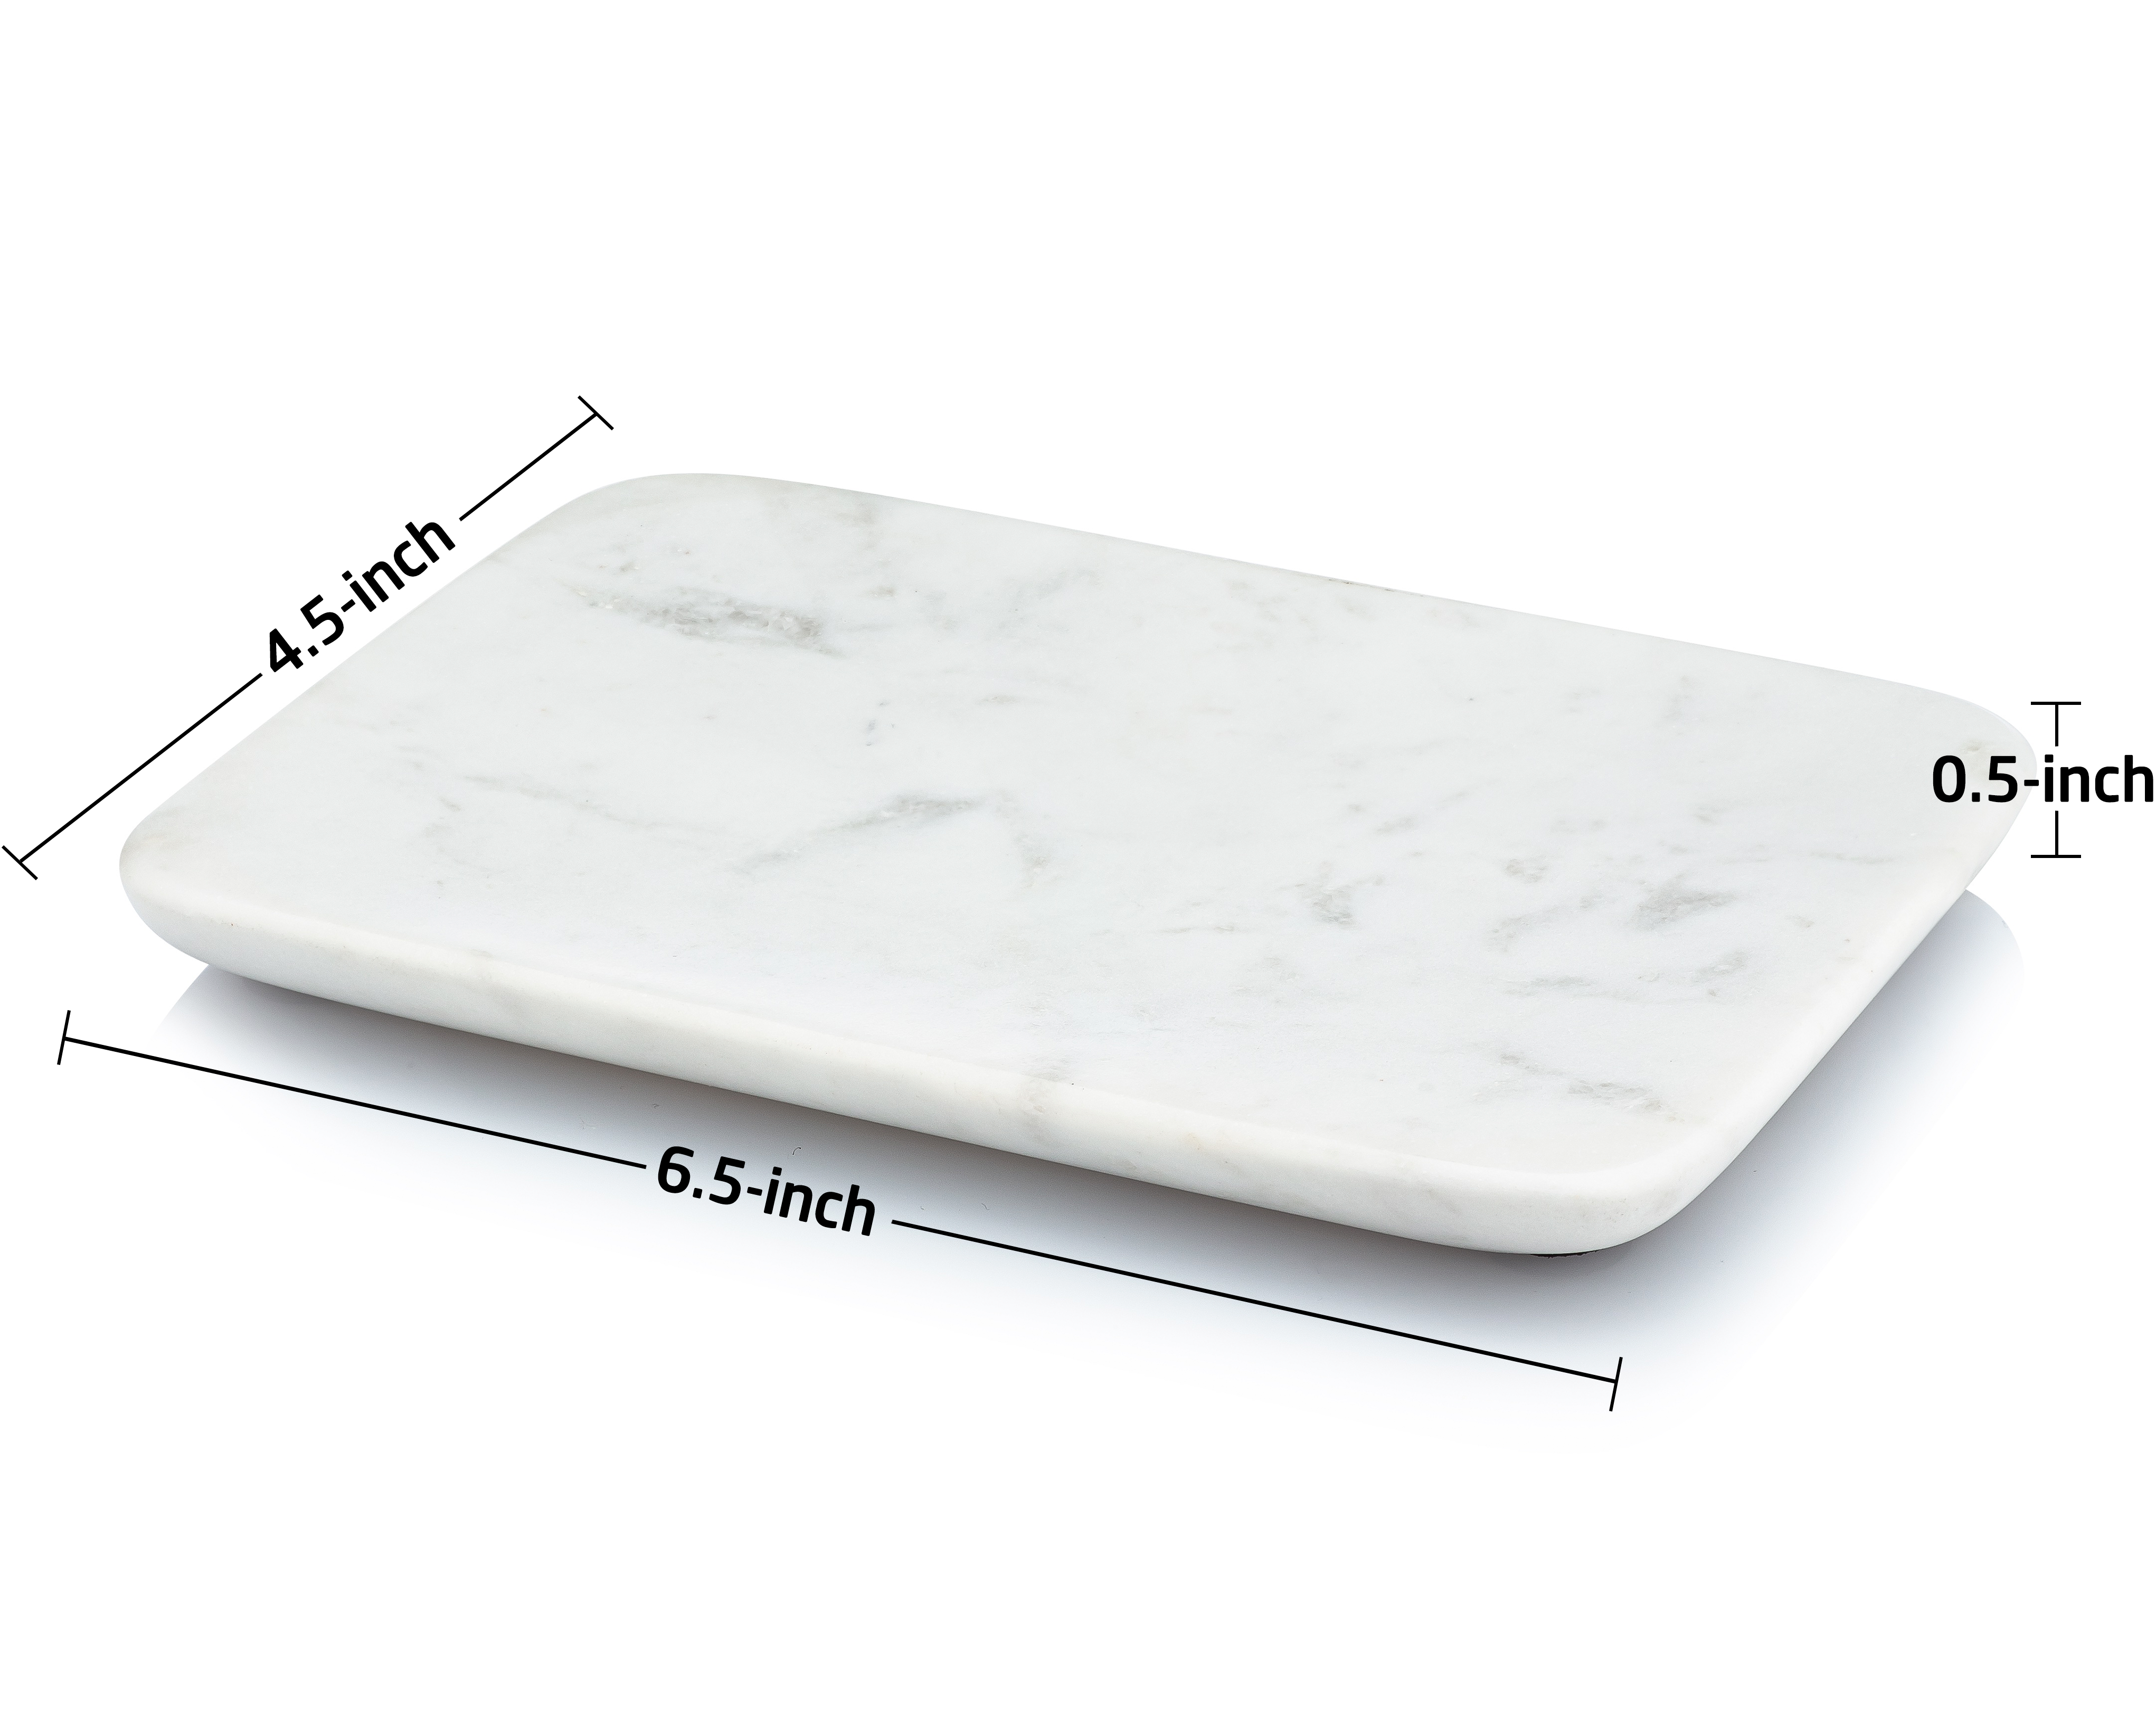 Beau Brummell for Men Marble Accessory Tray